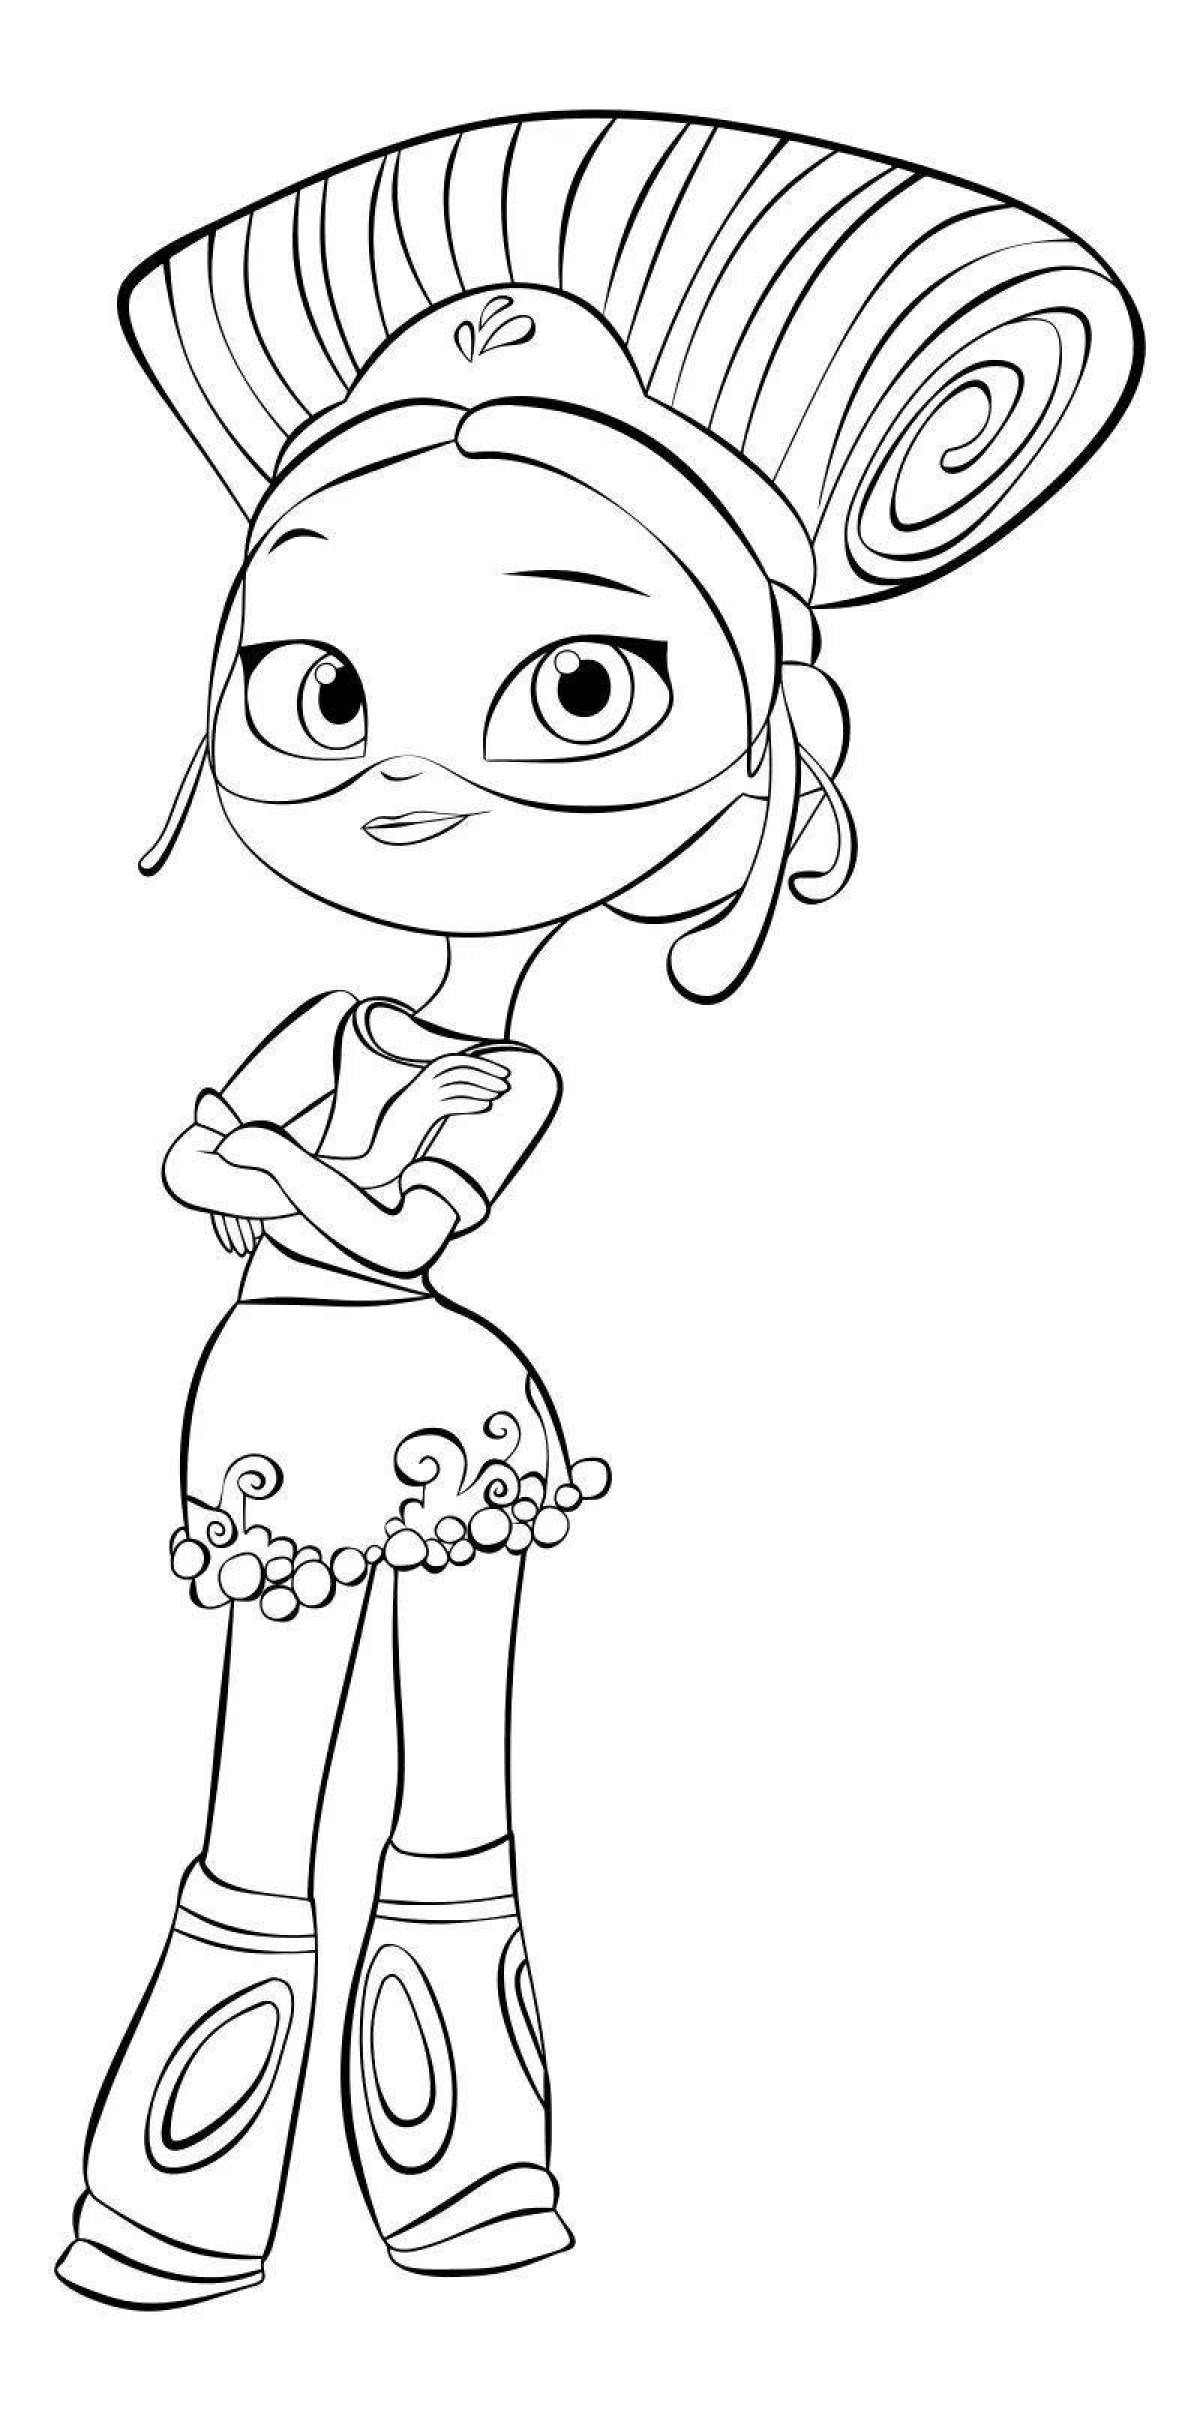 Exciting coloring page turn on the fairy patrol